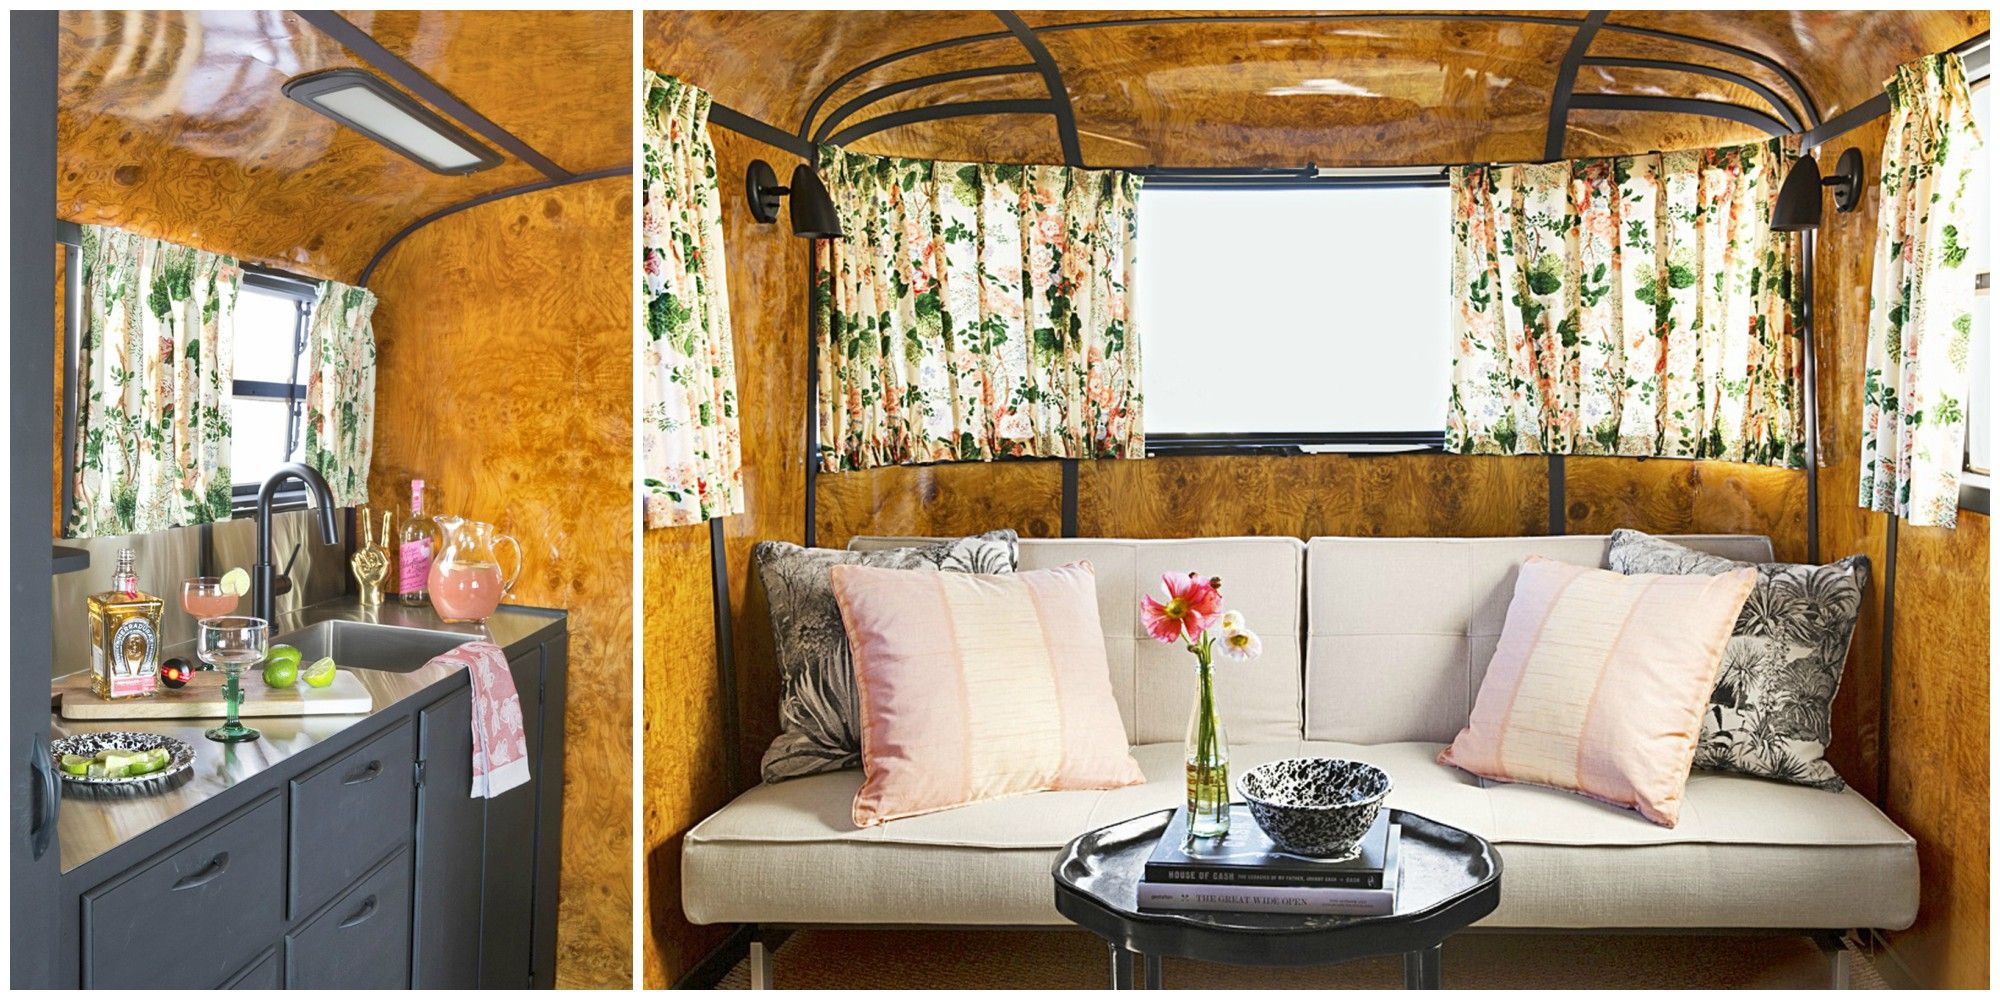 RV and Camper Decorating Ideas - RV Decor Pictures